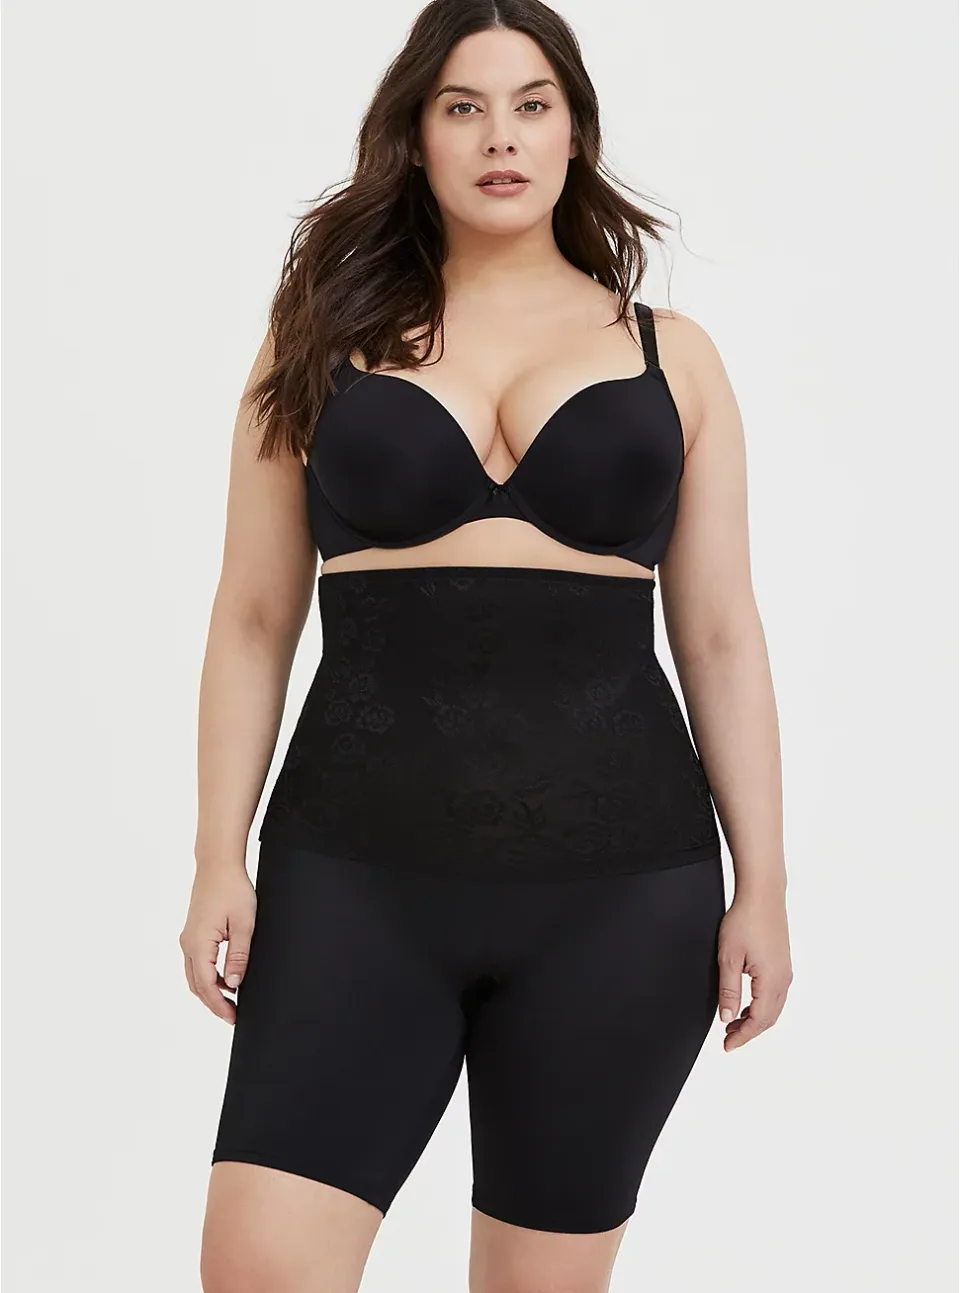 I'm plus-sized & there's a clear winner between Skims & Spanx - the